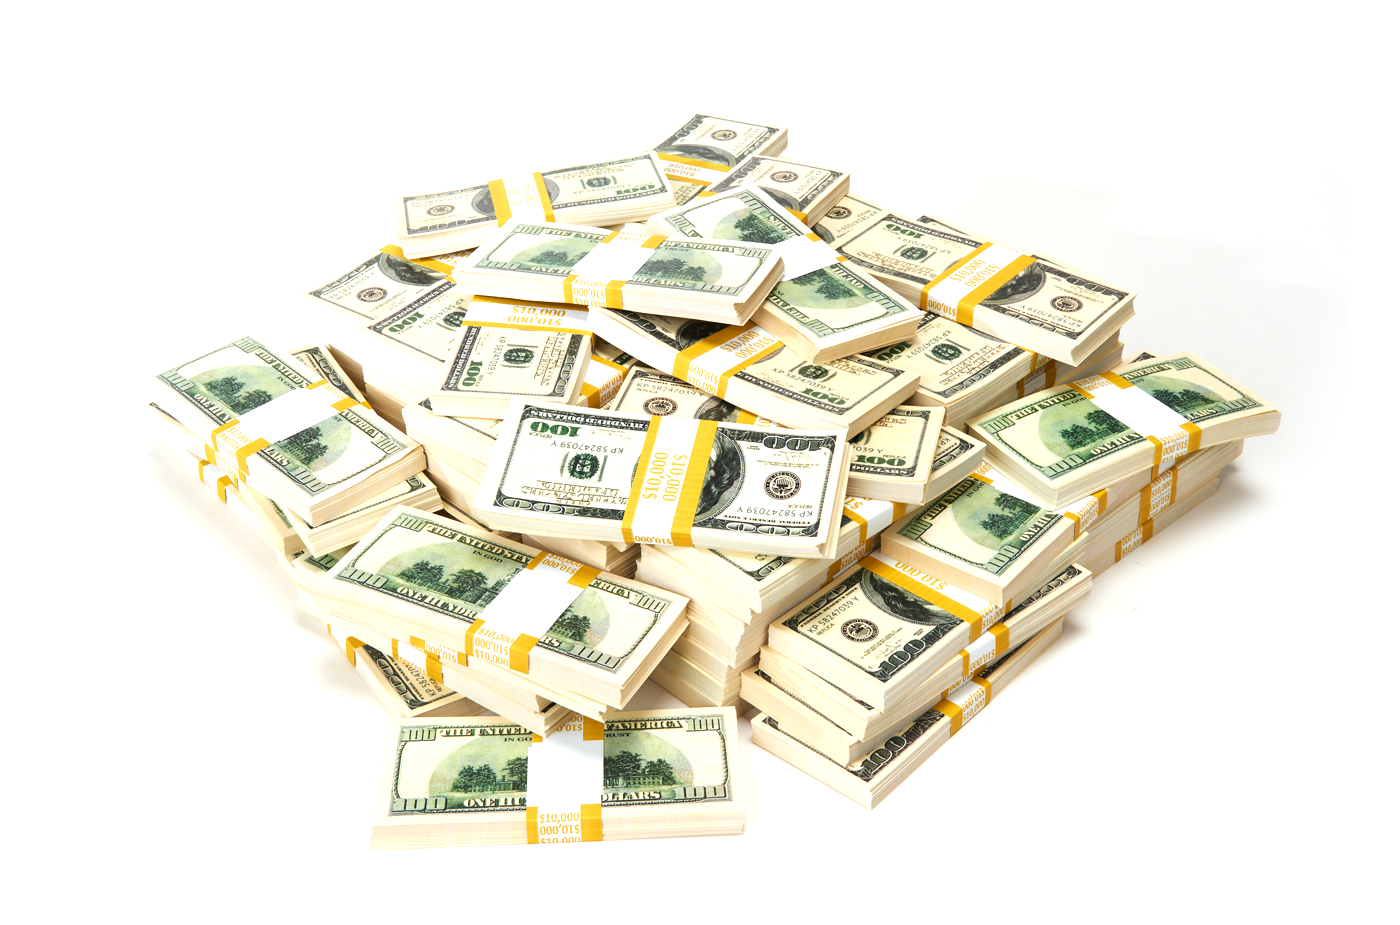 $500,000 in prop money from Strobeprops. 50 stacks of old 100s fake money used in movies and videos.